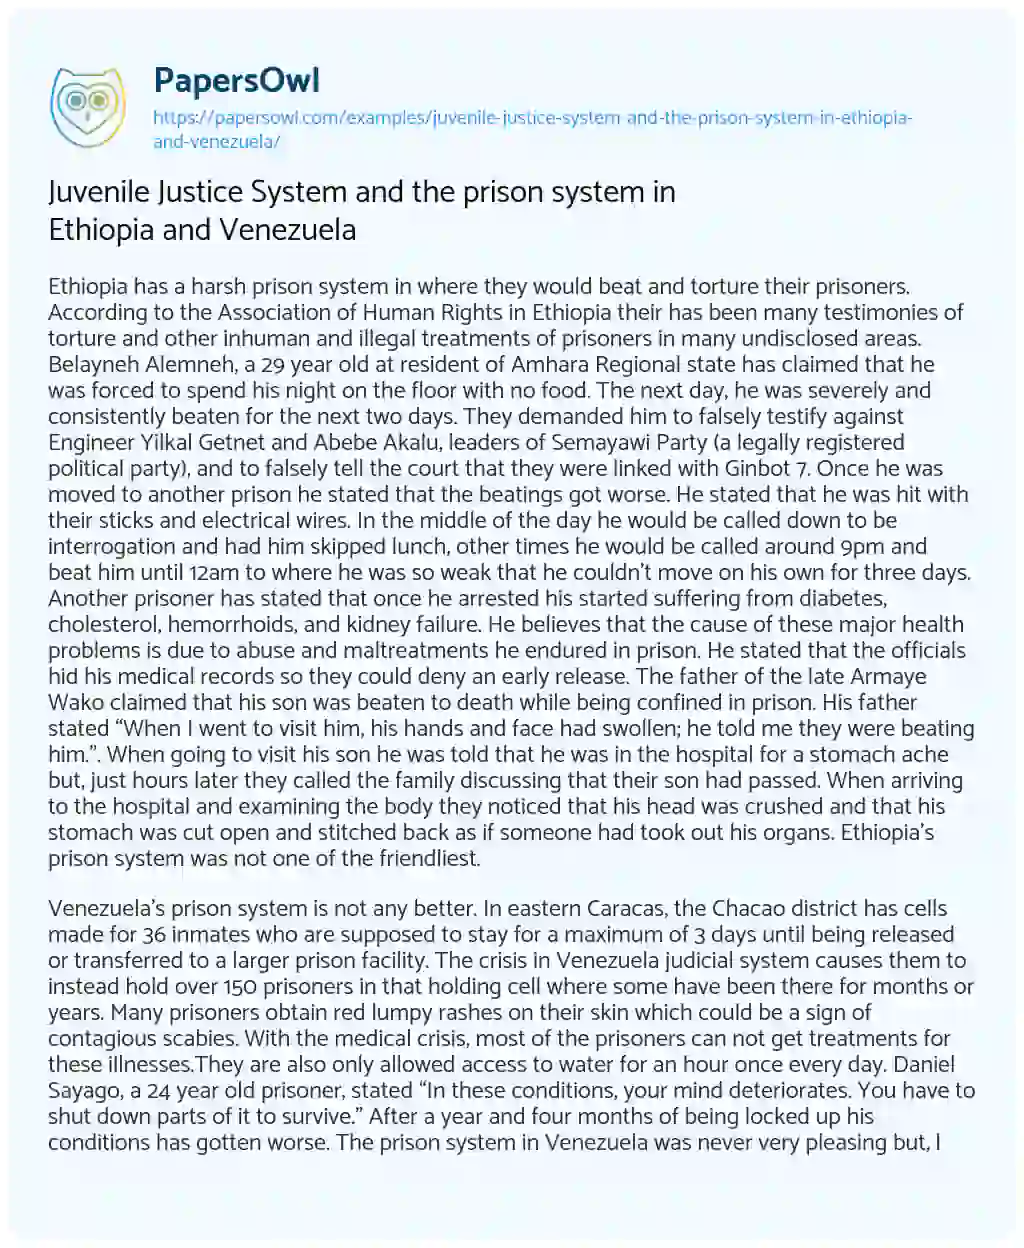 Essay on Juvenile Justice System and the Prison System in Ethiopia and Venezuela